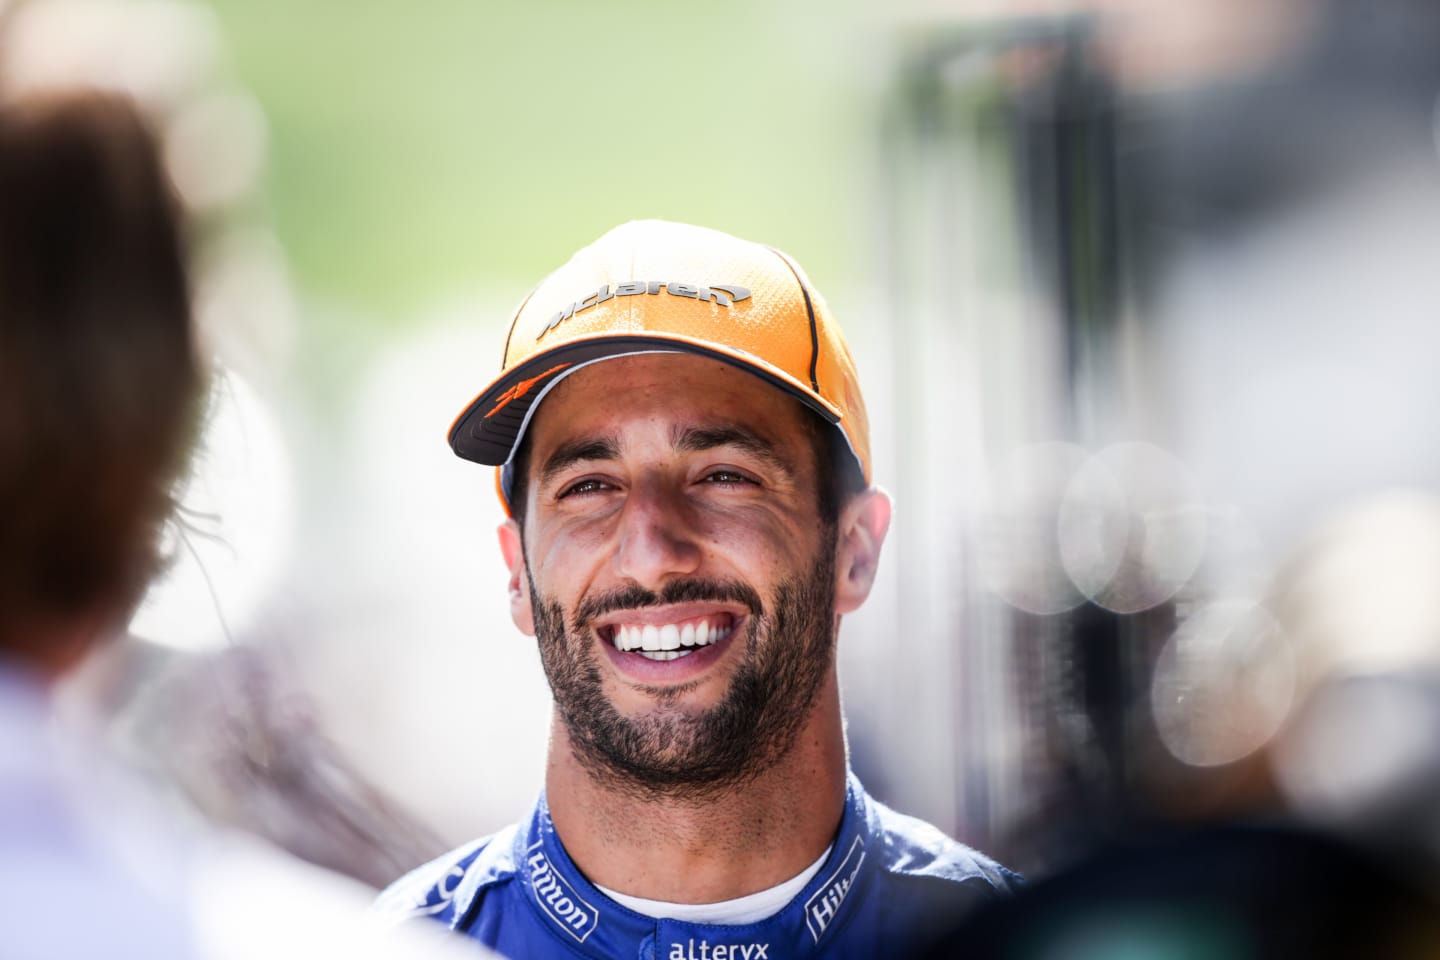 SPIELBERG, AUSTRIA - JUNE 26: Daniel Ricciardo of Australia and McLaren  qualifying ahead of the F1 Grand Prix of Styria at Red Bull Ring on June 26, 2021 in Spielberg, Austria. (Photo by Peter Fox/Getty Images)